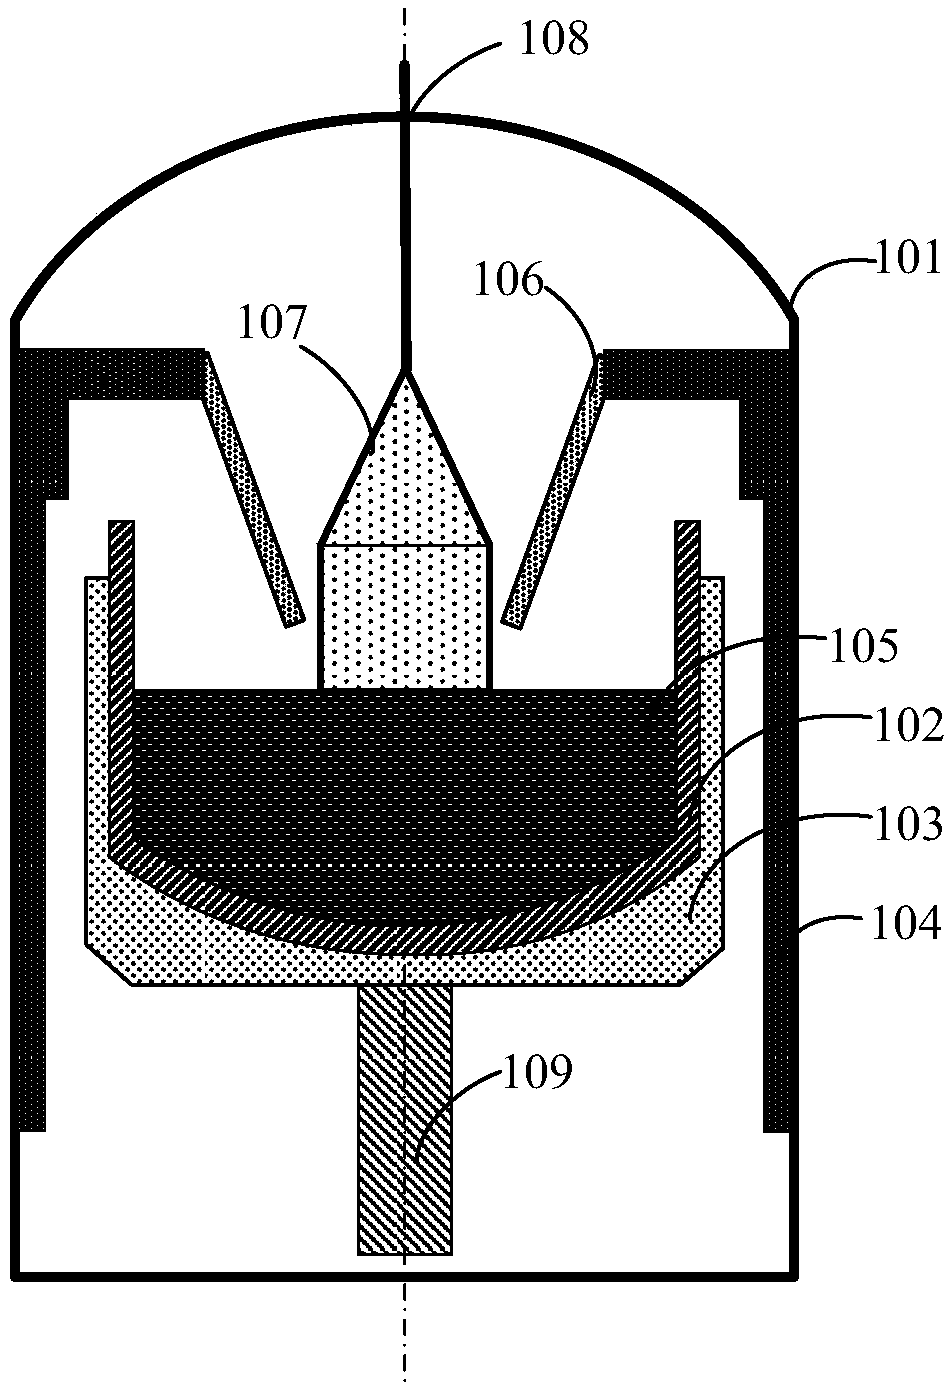 Crystal growth control method, device and system and computer storage medium